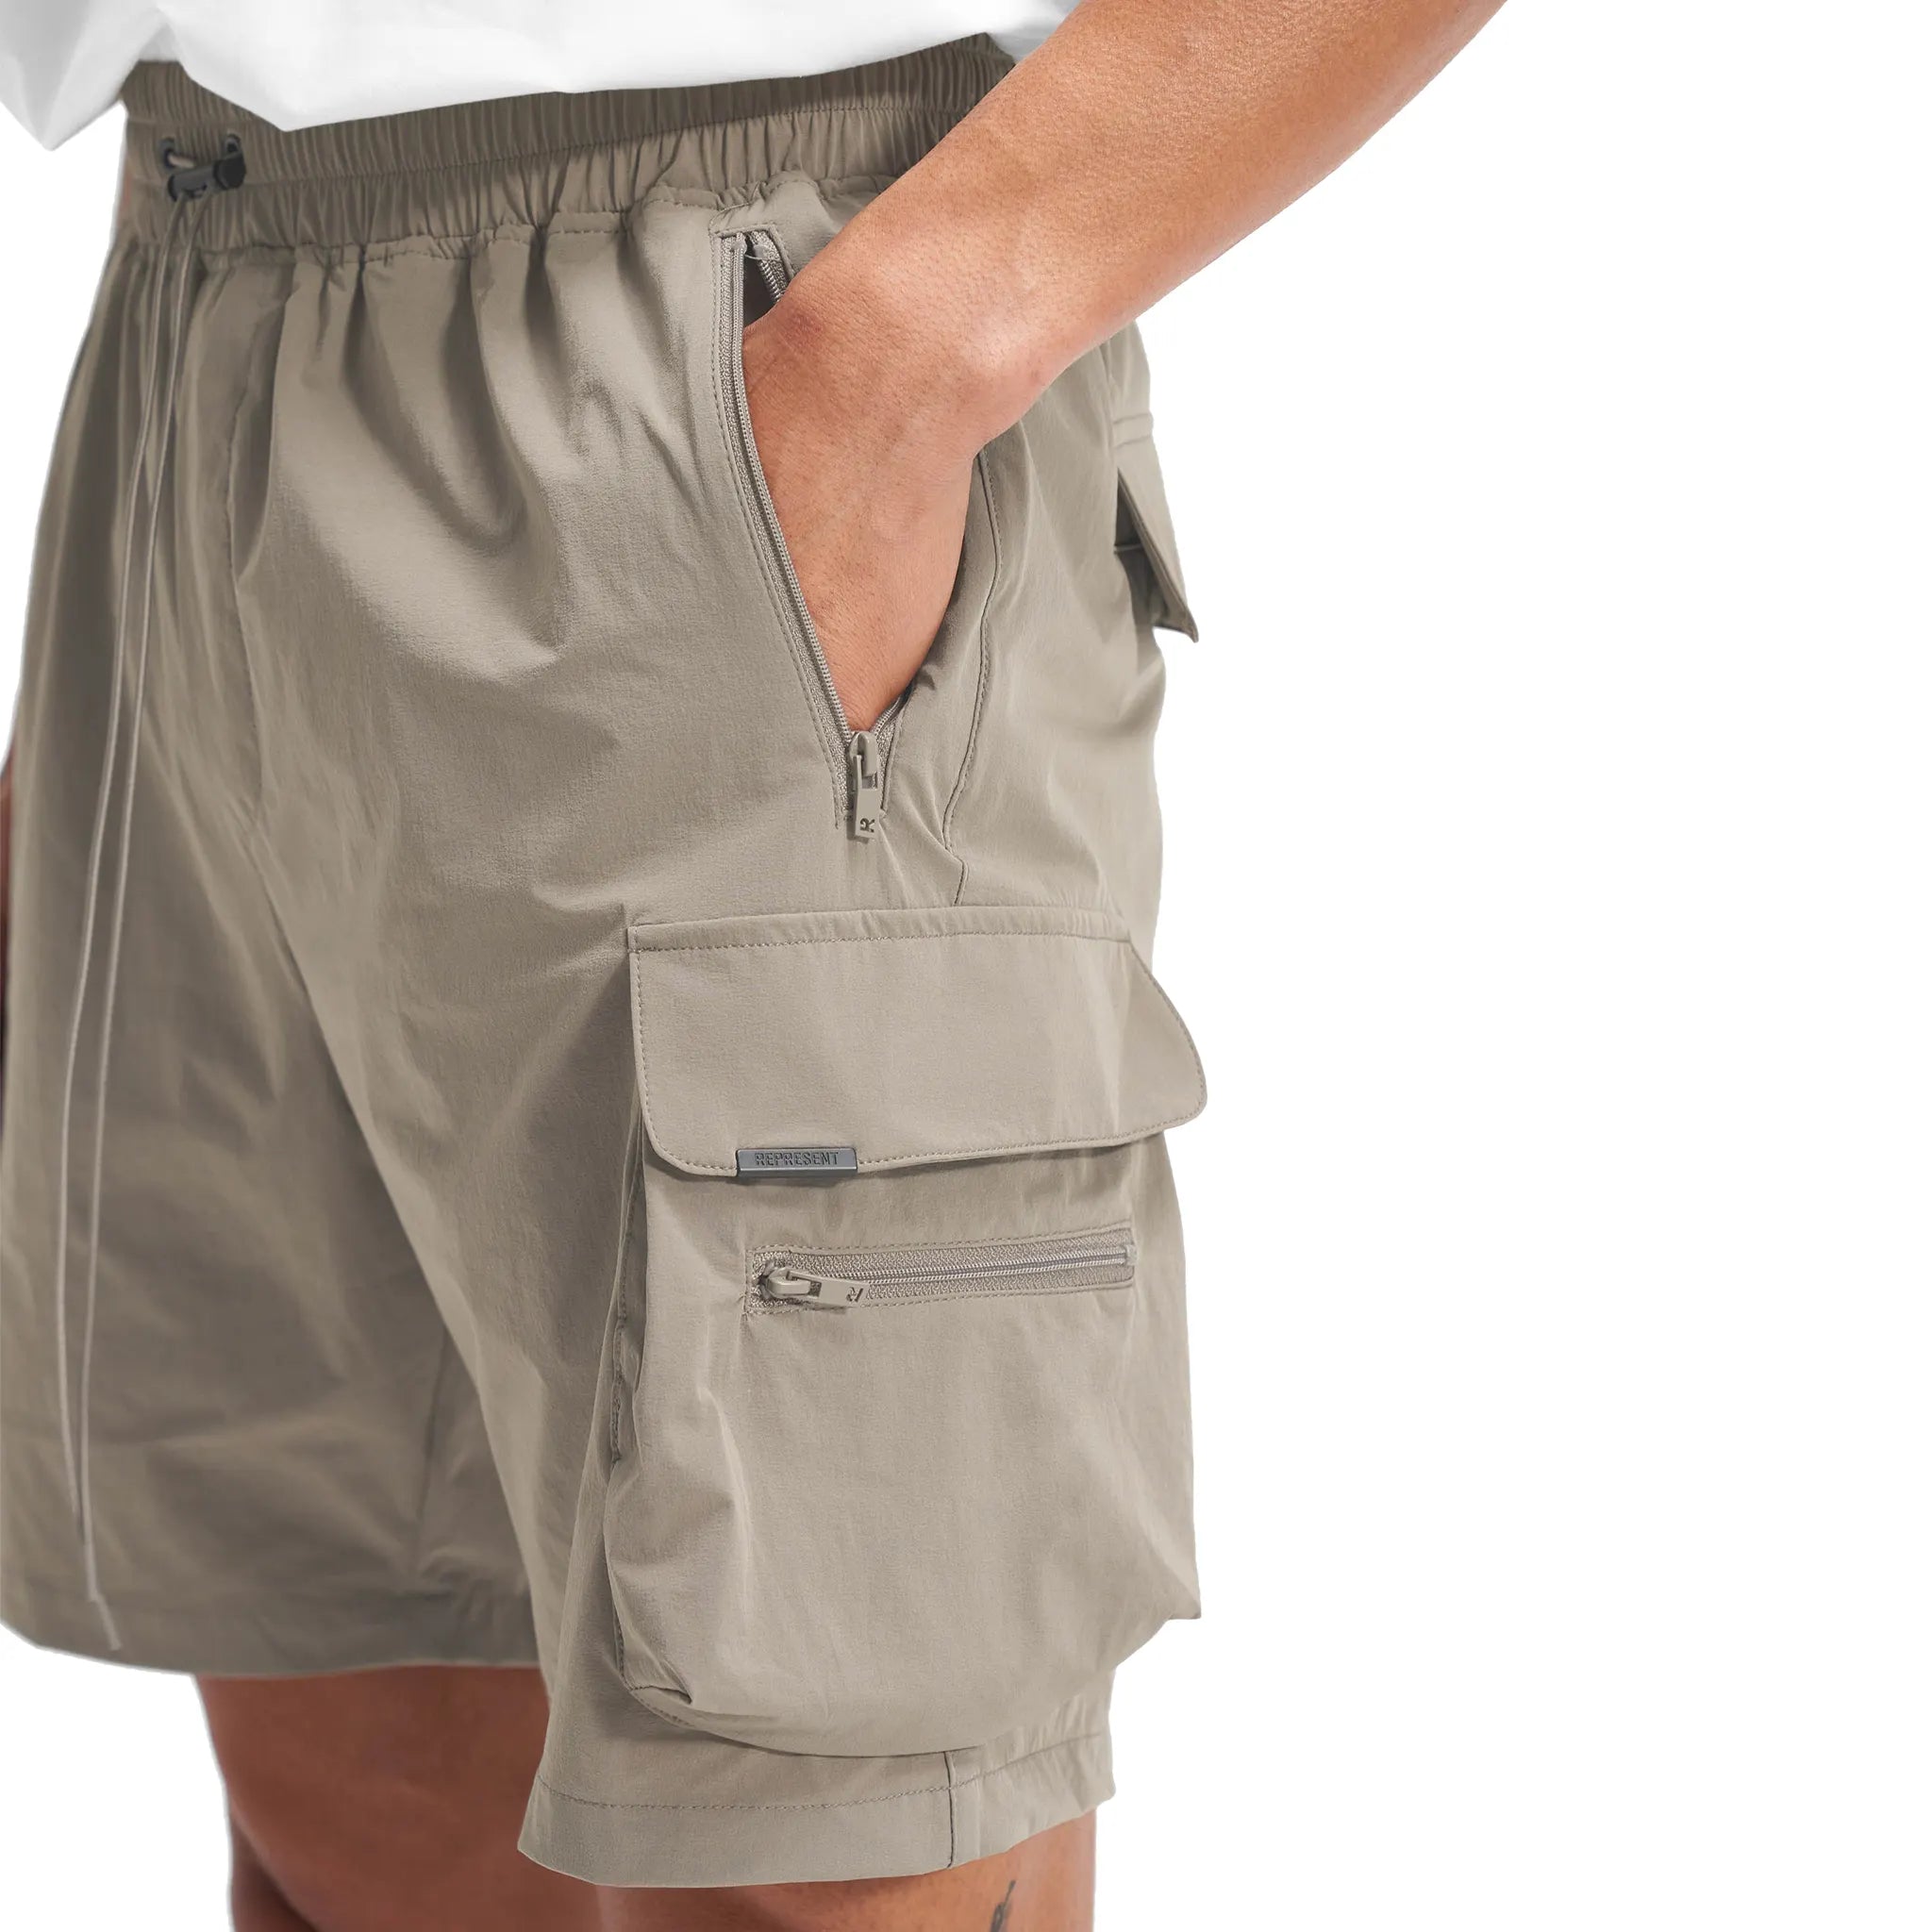 Pocket view of Represent 247 Taupe Shorts M09048-38